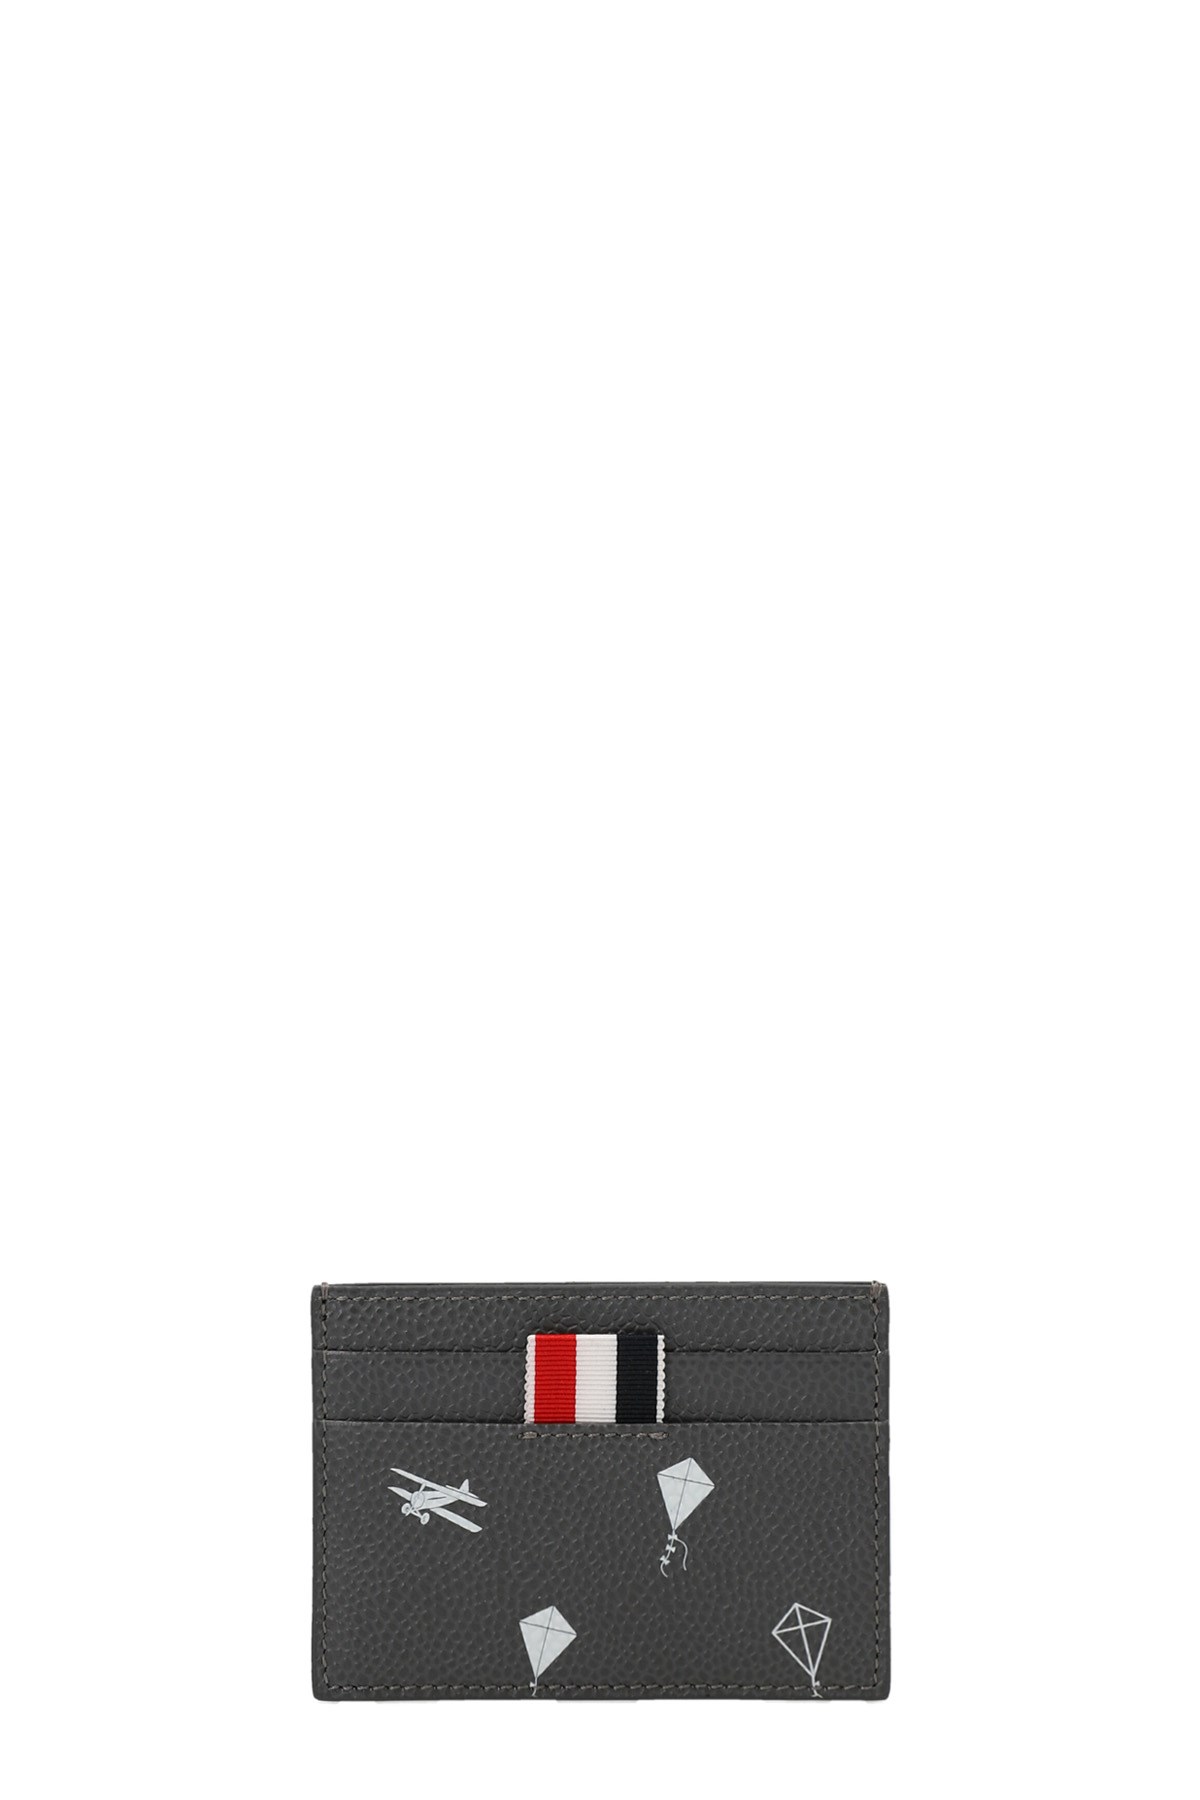 THOM BROWNE 'Sky Icons' Card Holder